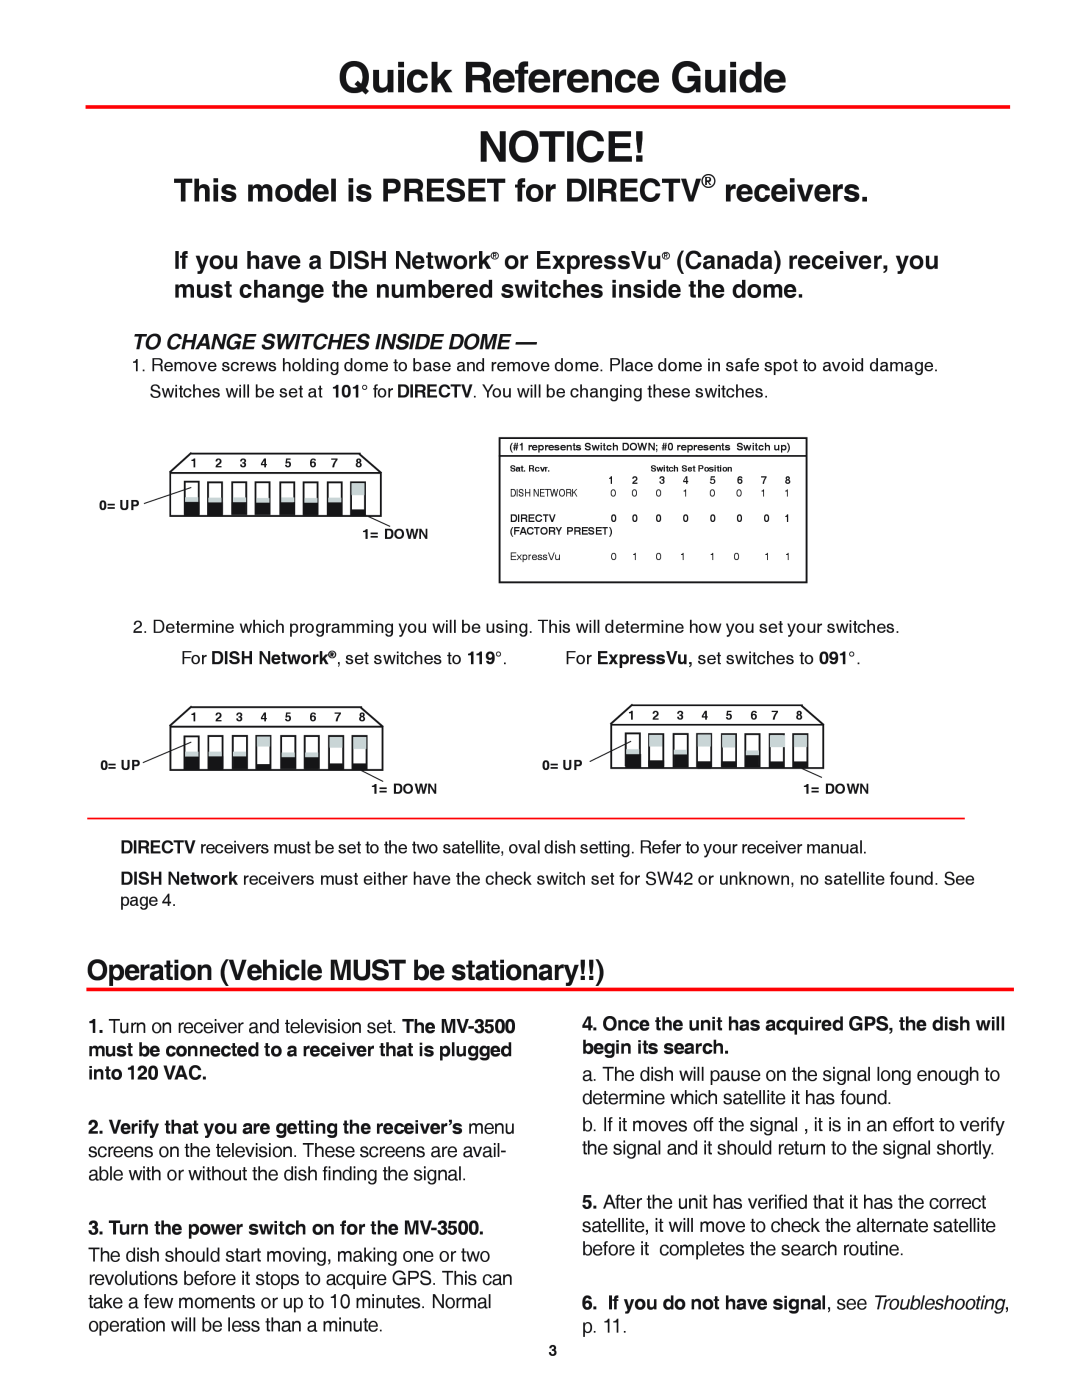 Winegard MV-3500 This model is PRESET for DIRECTV receivers, Operation Vehicle MUST be stationary, Quick Reference Guide 